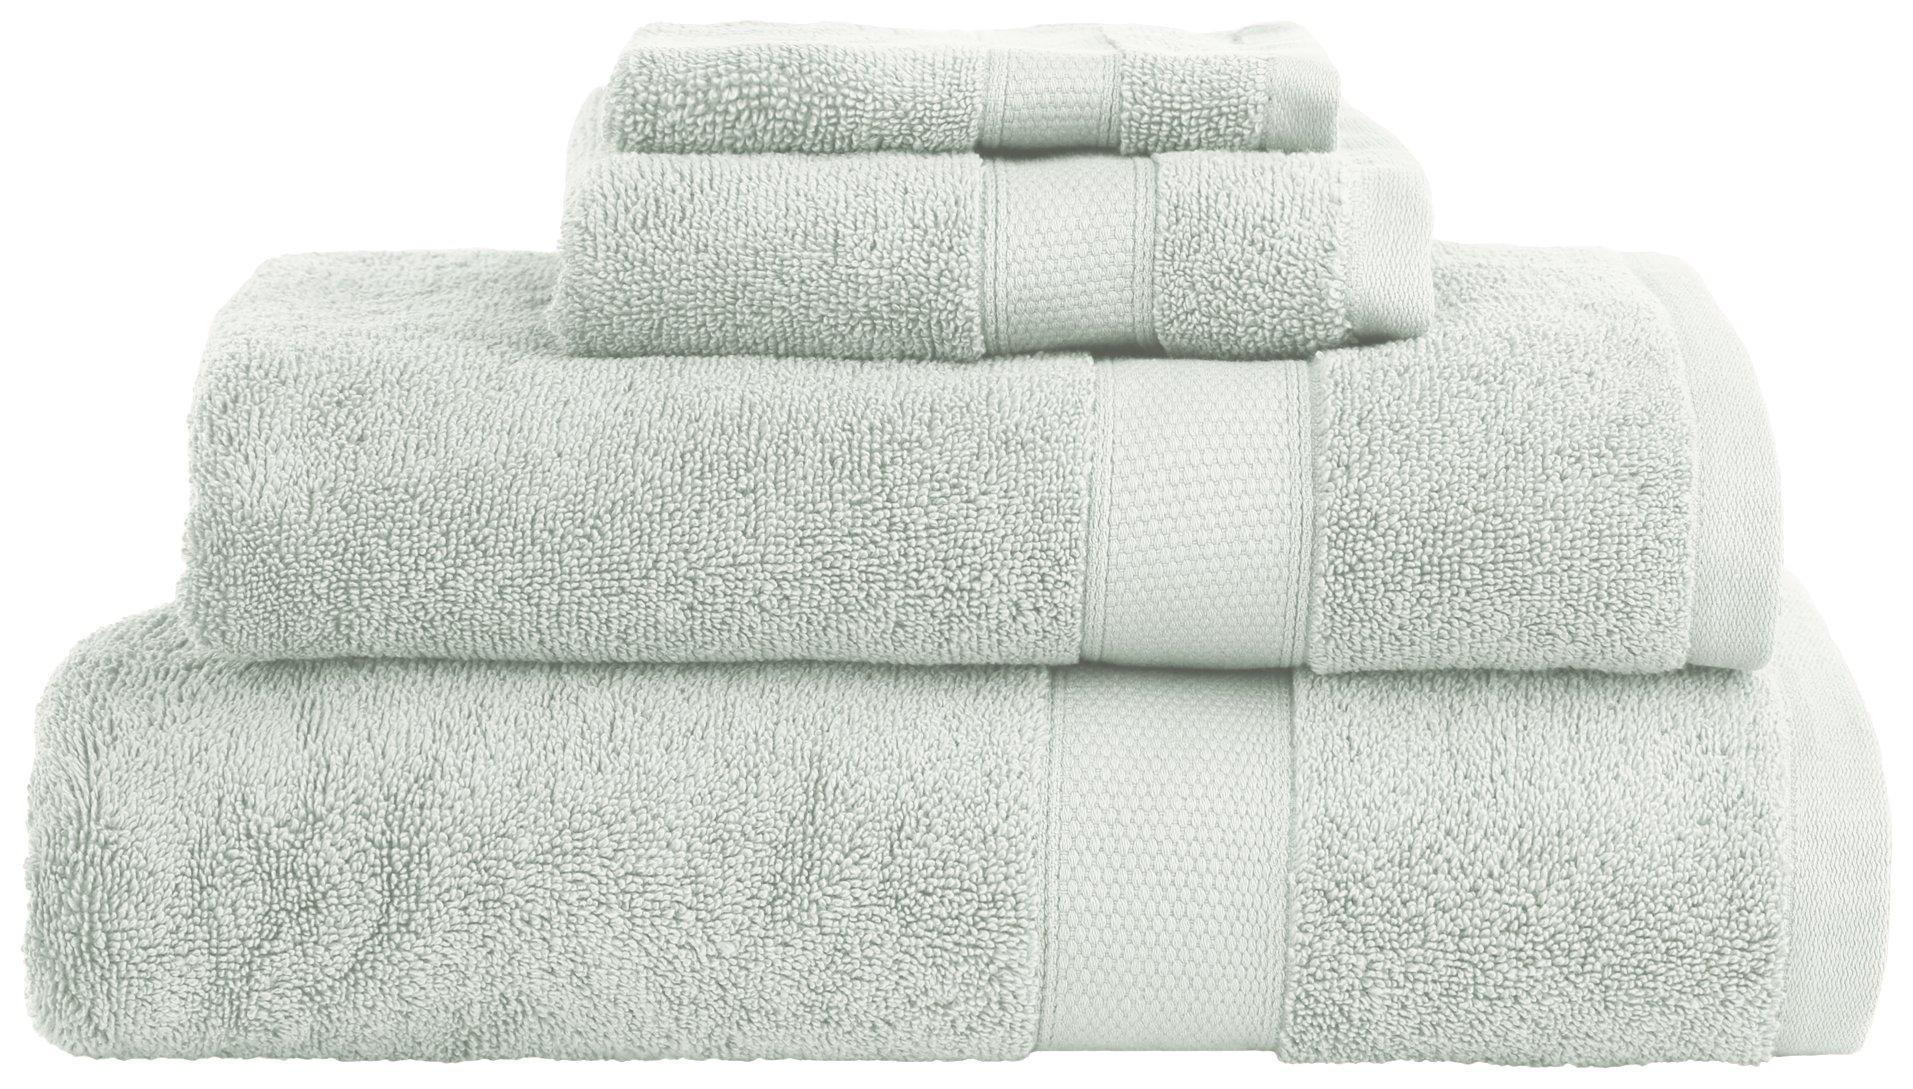 ZEST Kitchen + Home Performance Towel Collection